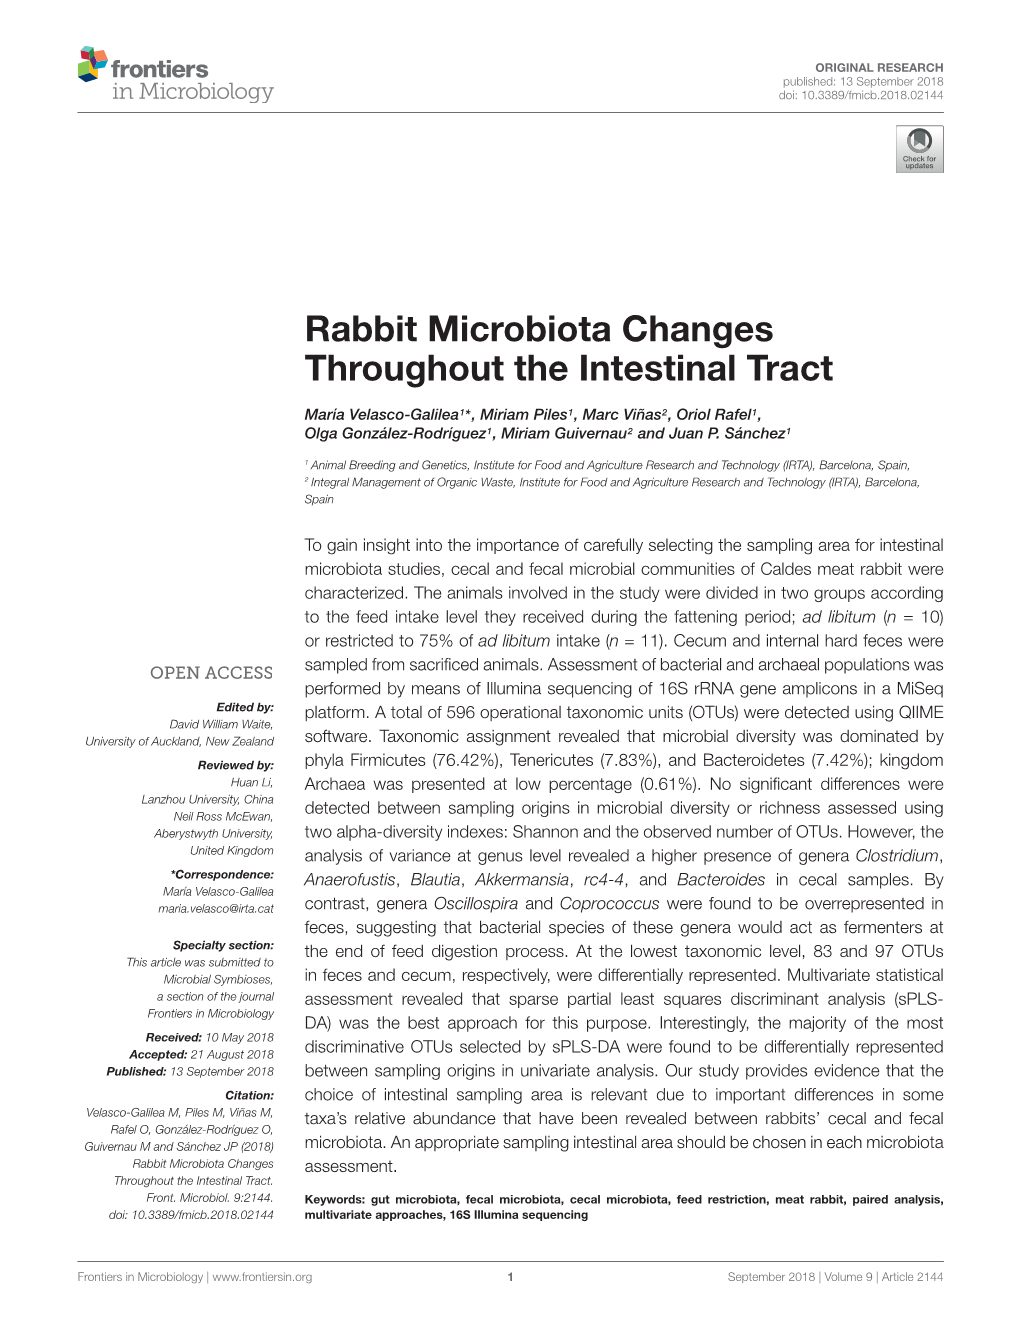 Rabbit Microbiota Changes Throughout the Intestinal Tract